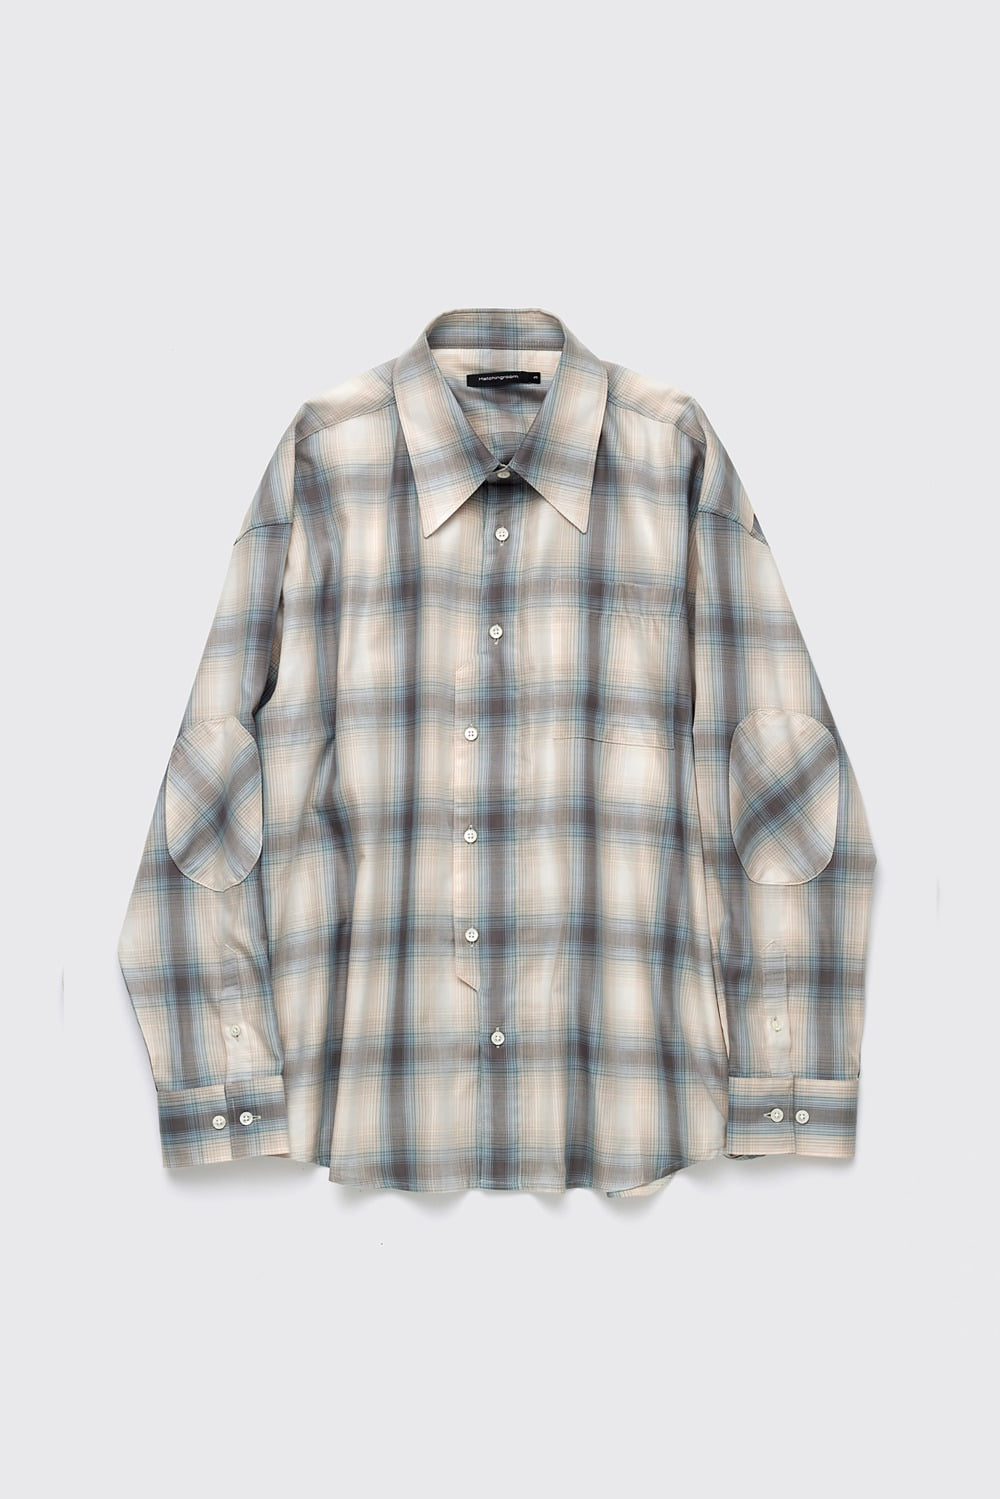 Archive Shirt Sky Blue Ombre (3rd Restock)